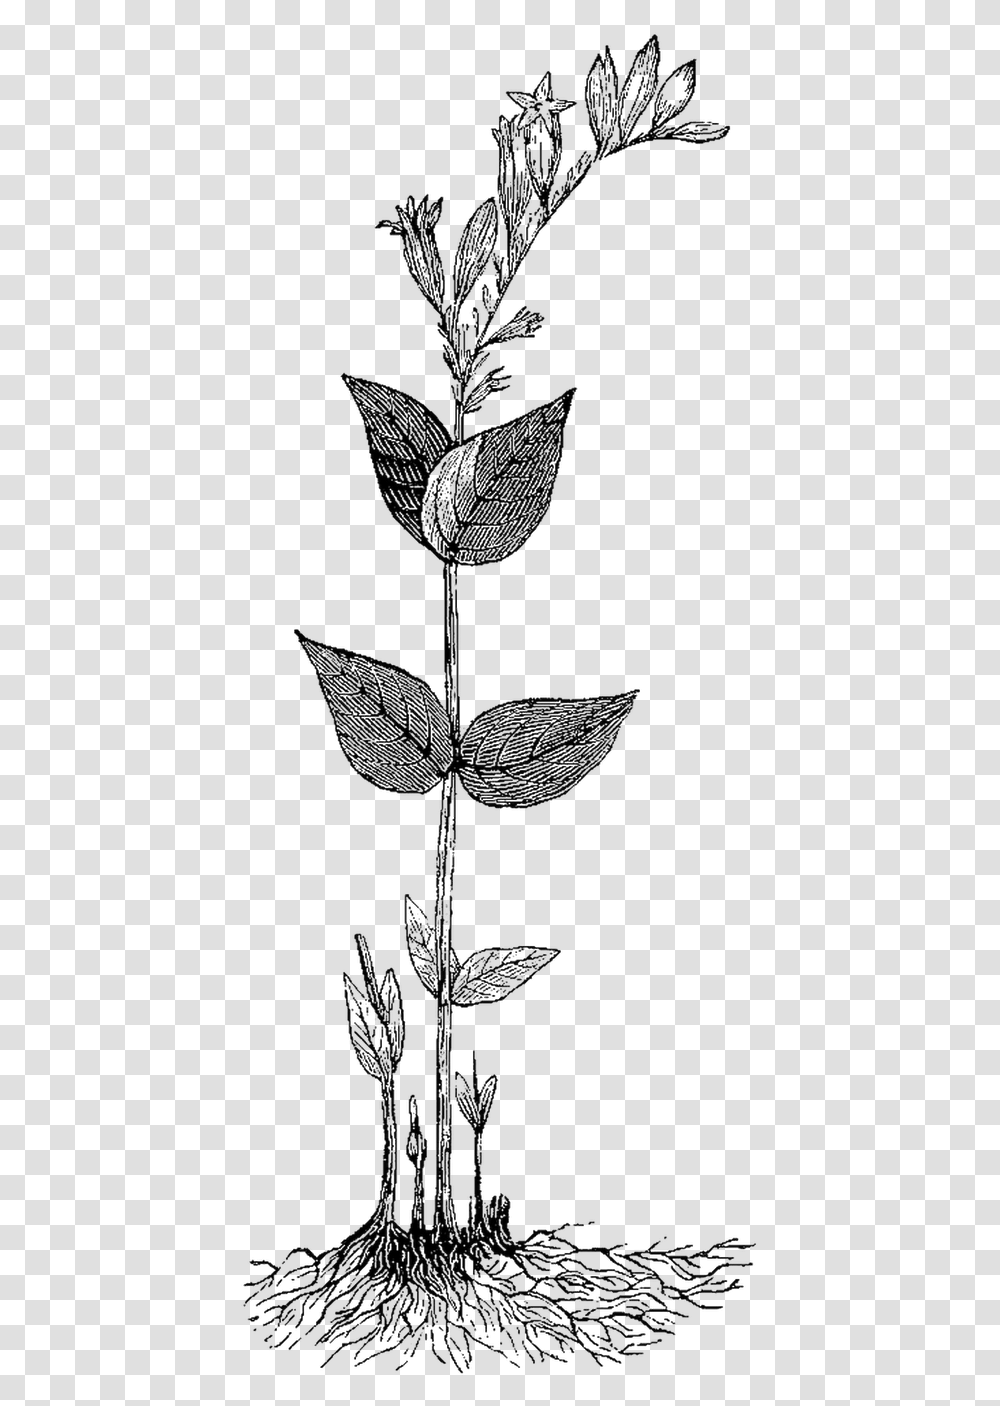 Drawn Herbs Aesthetic Rosa Glauca, Leaf, Plant, Flower, Blossom Transparent Png